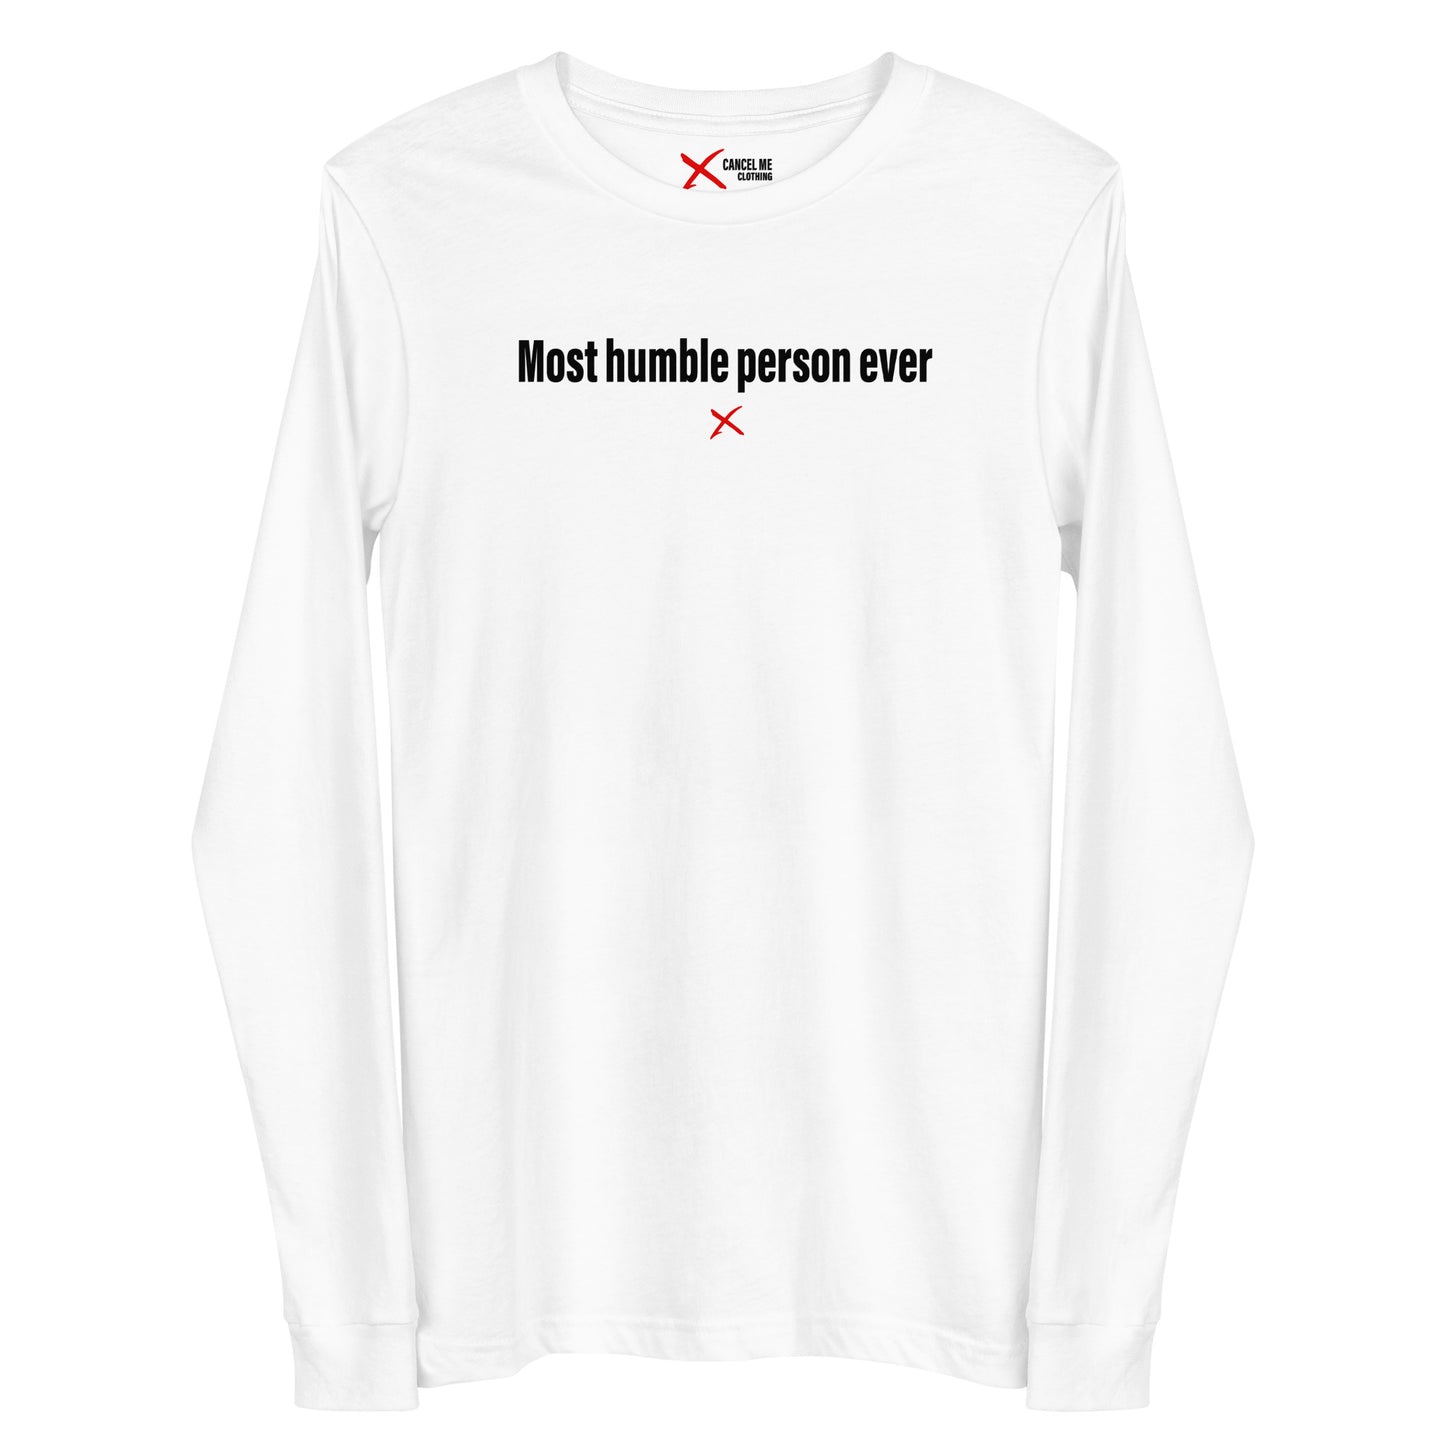 Most humble person ever - Longsleeve